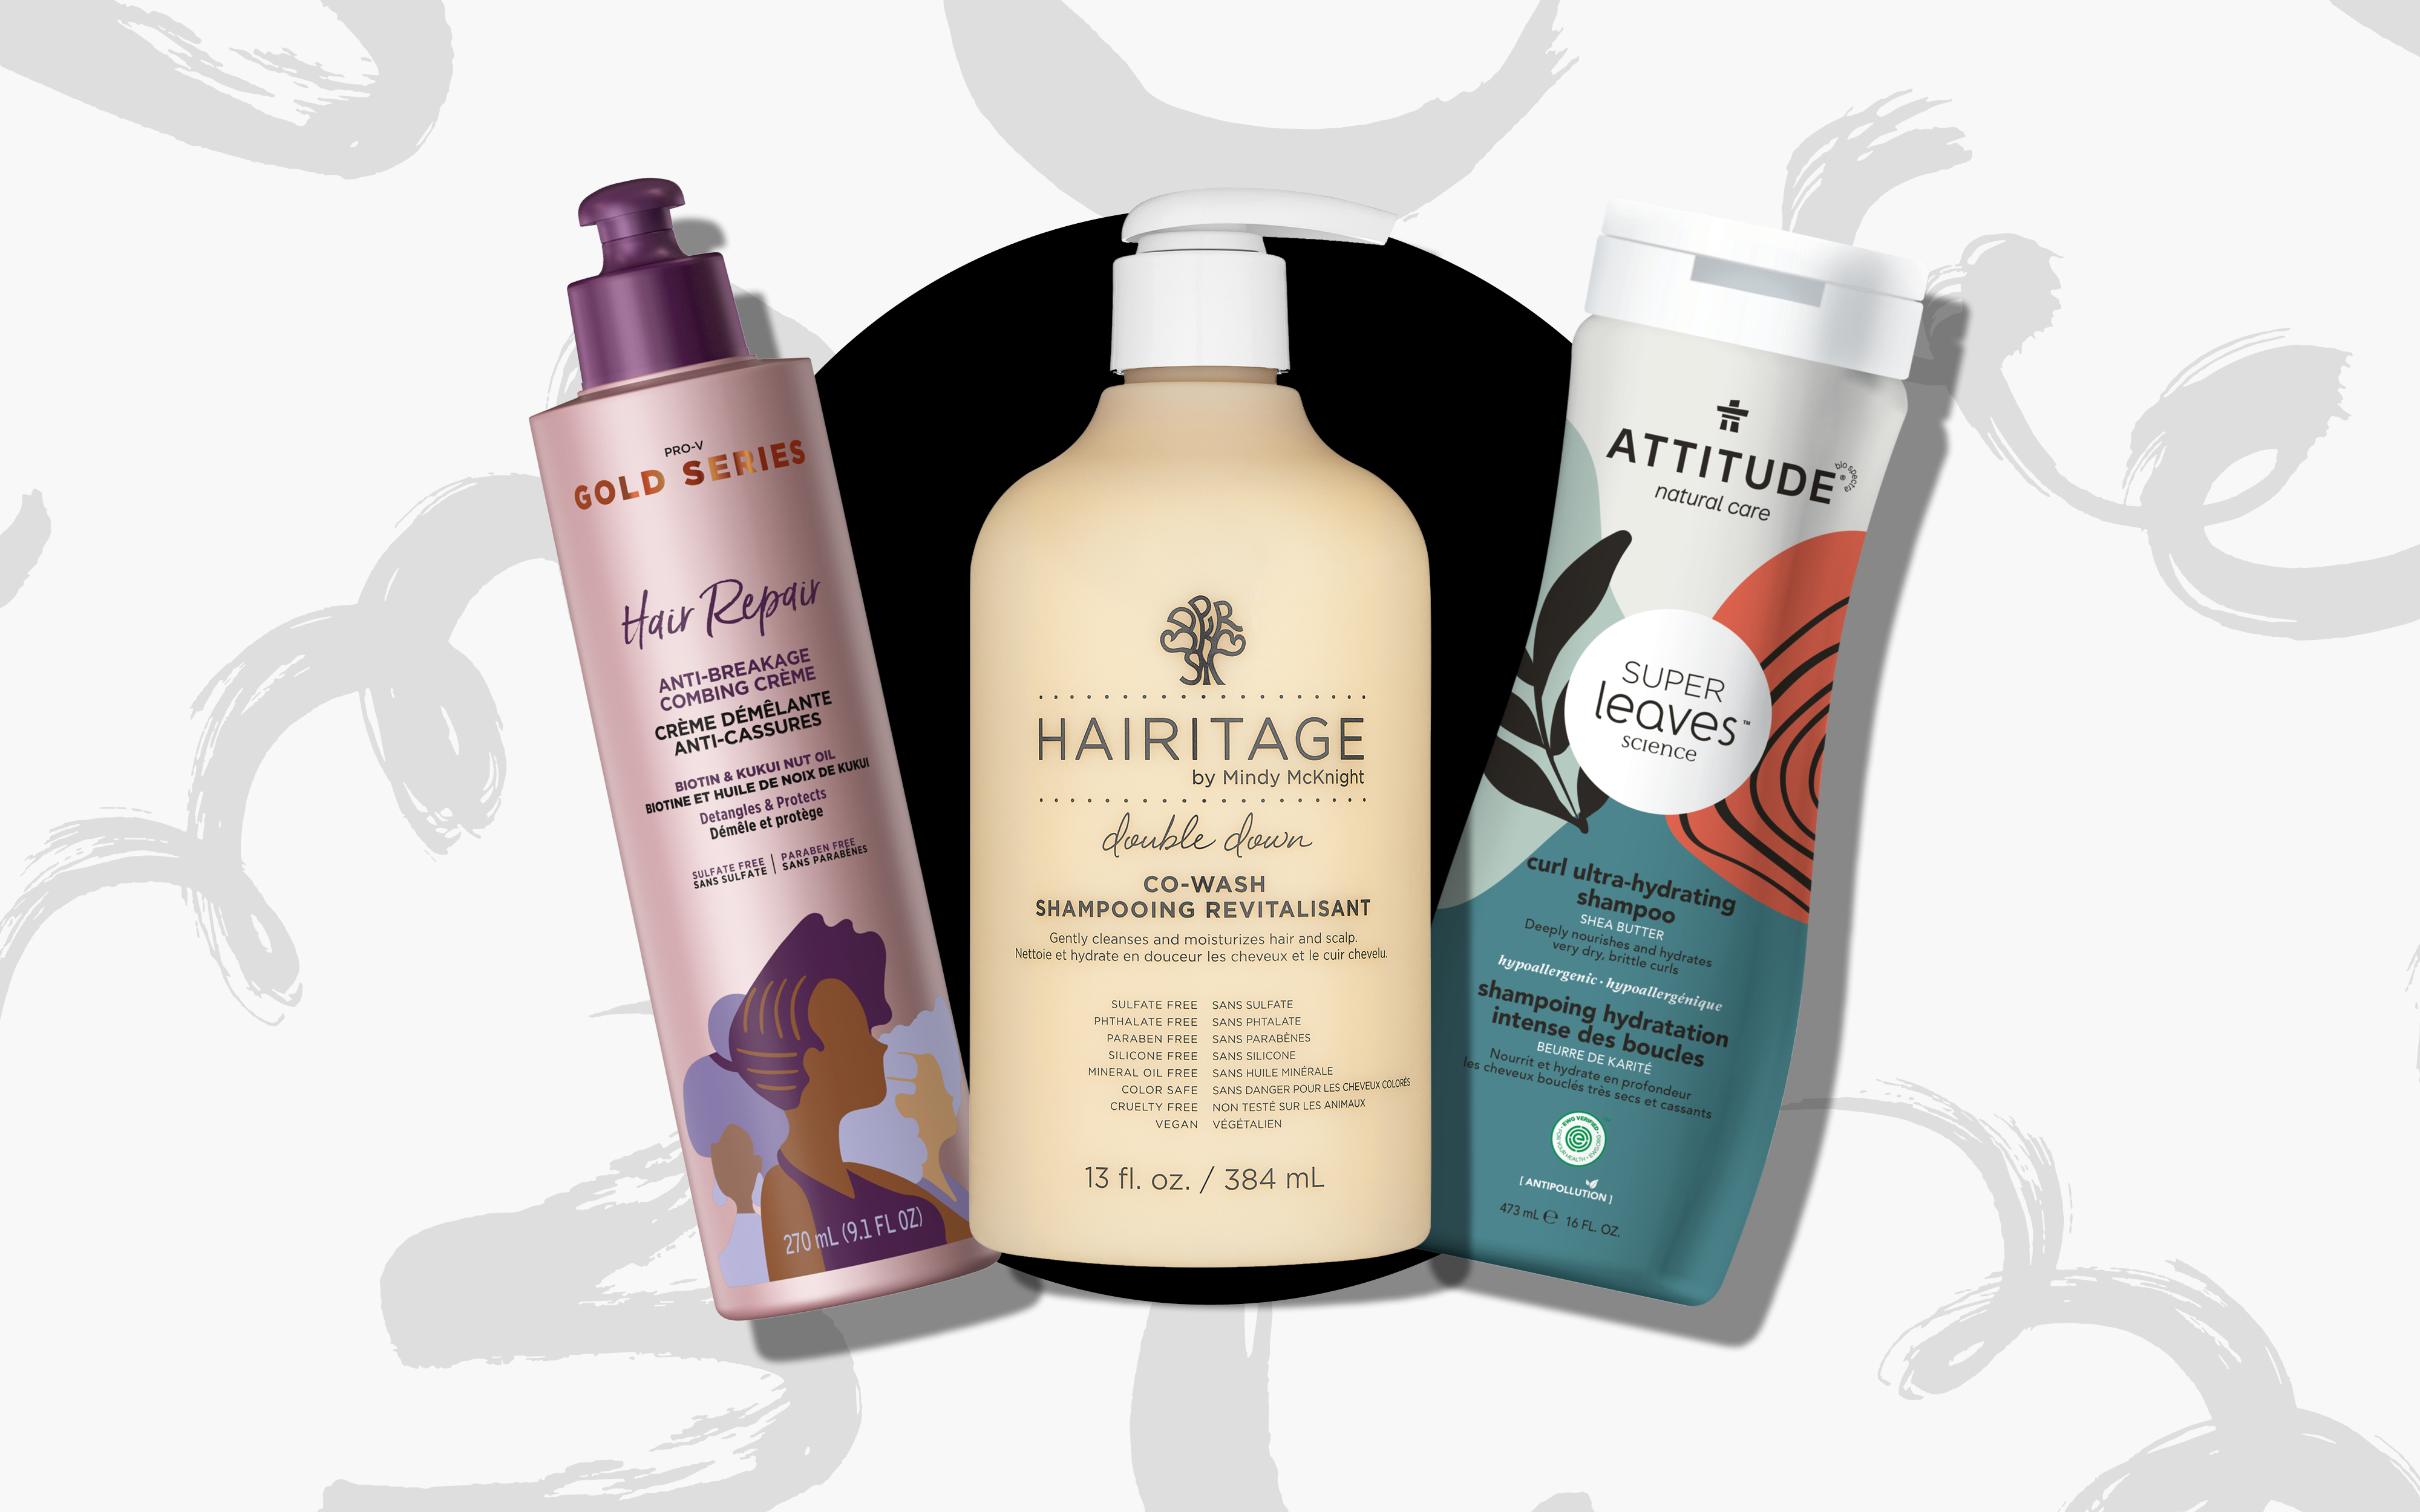 Products for Natural Hair Textures: 9 New Products We're Excited About -  FASHION Magazine